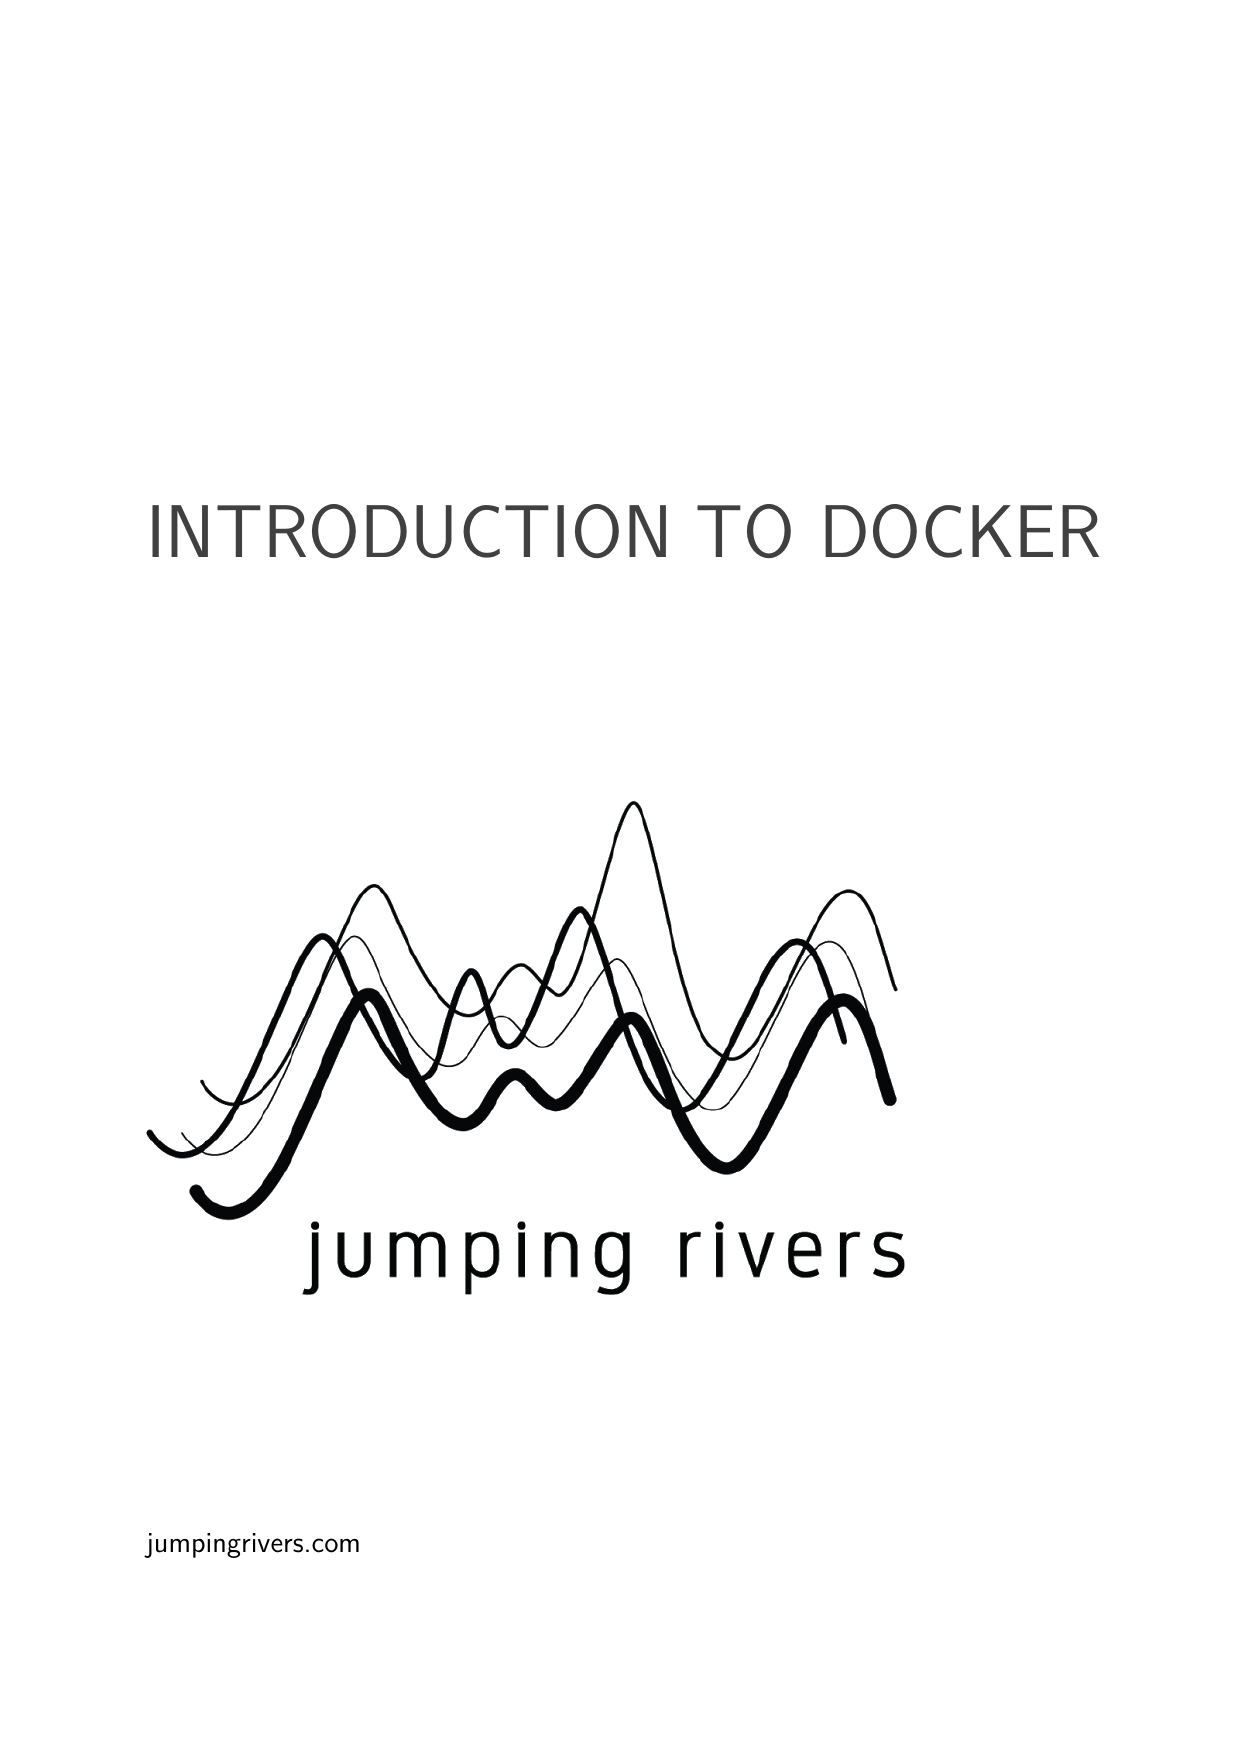 Page 1 of example course material for Introduction to Docker